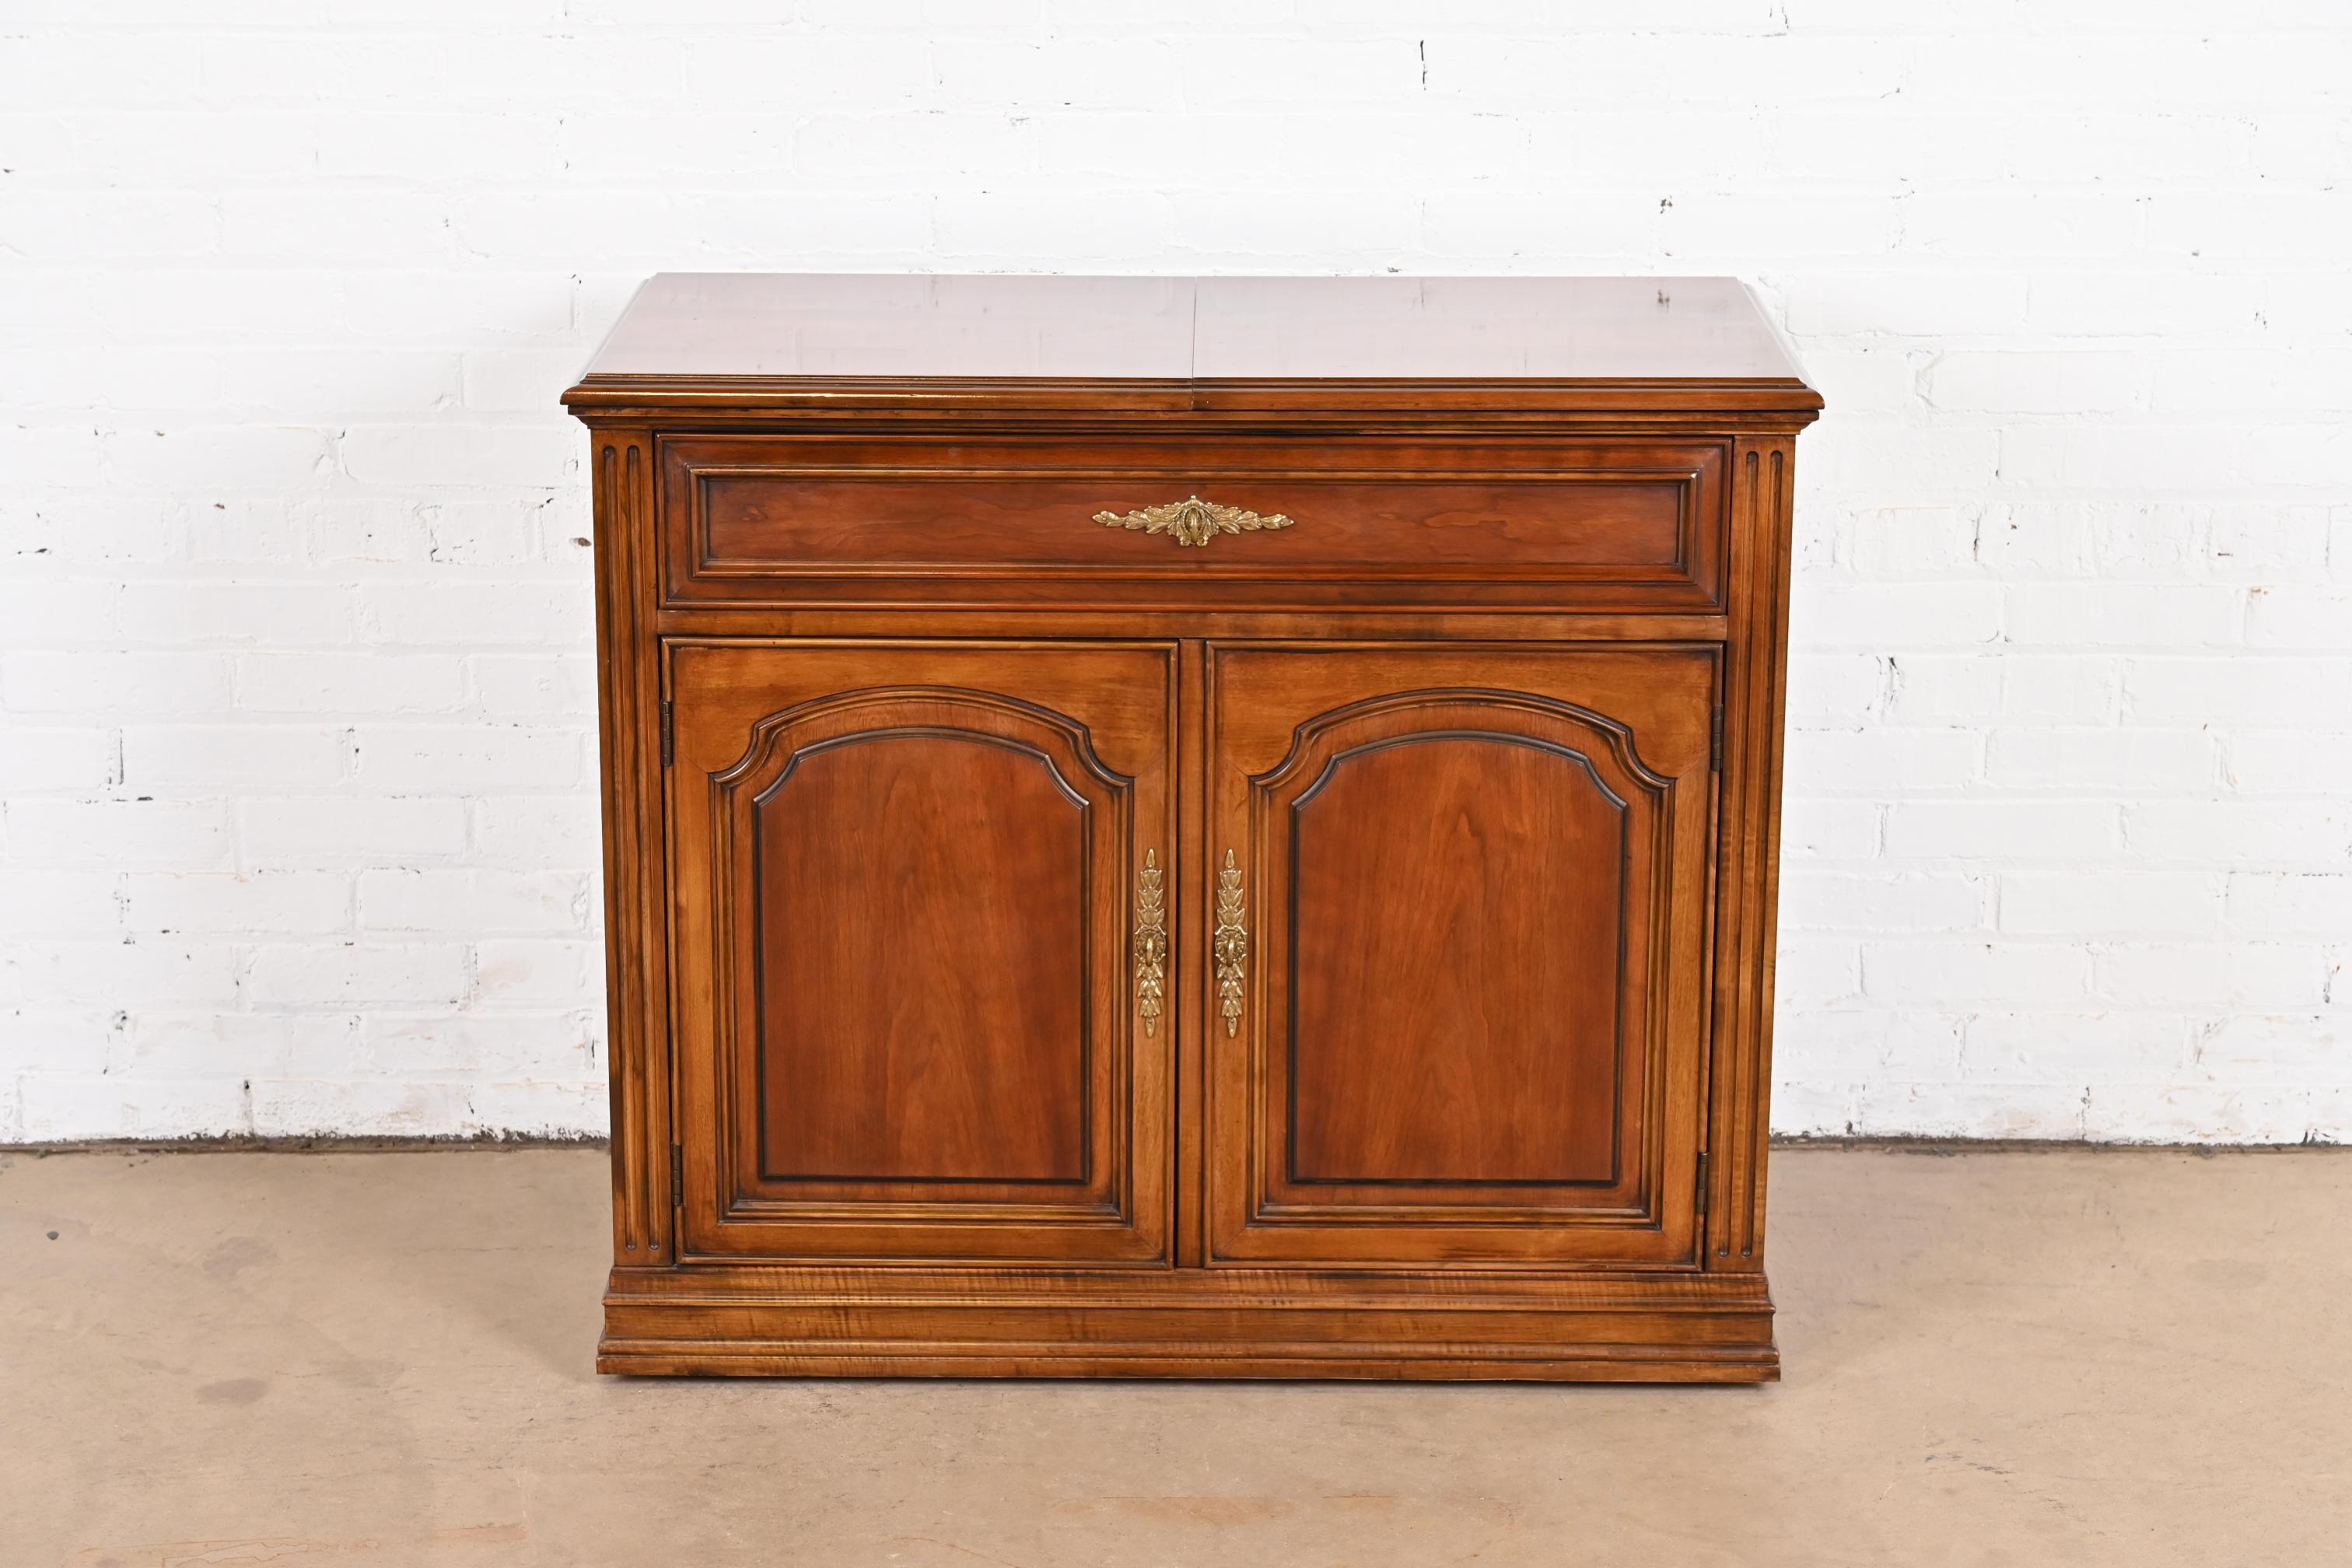 A beautiful French Regency Louis XVI style flip top rolling buffet server or bar cabinet

By White Furniture

USA, circa 1970s

Carved cherry wood, with original brass hardware.

Measures: 38